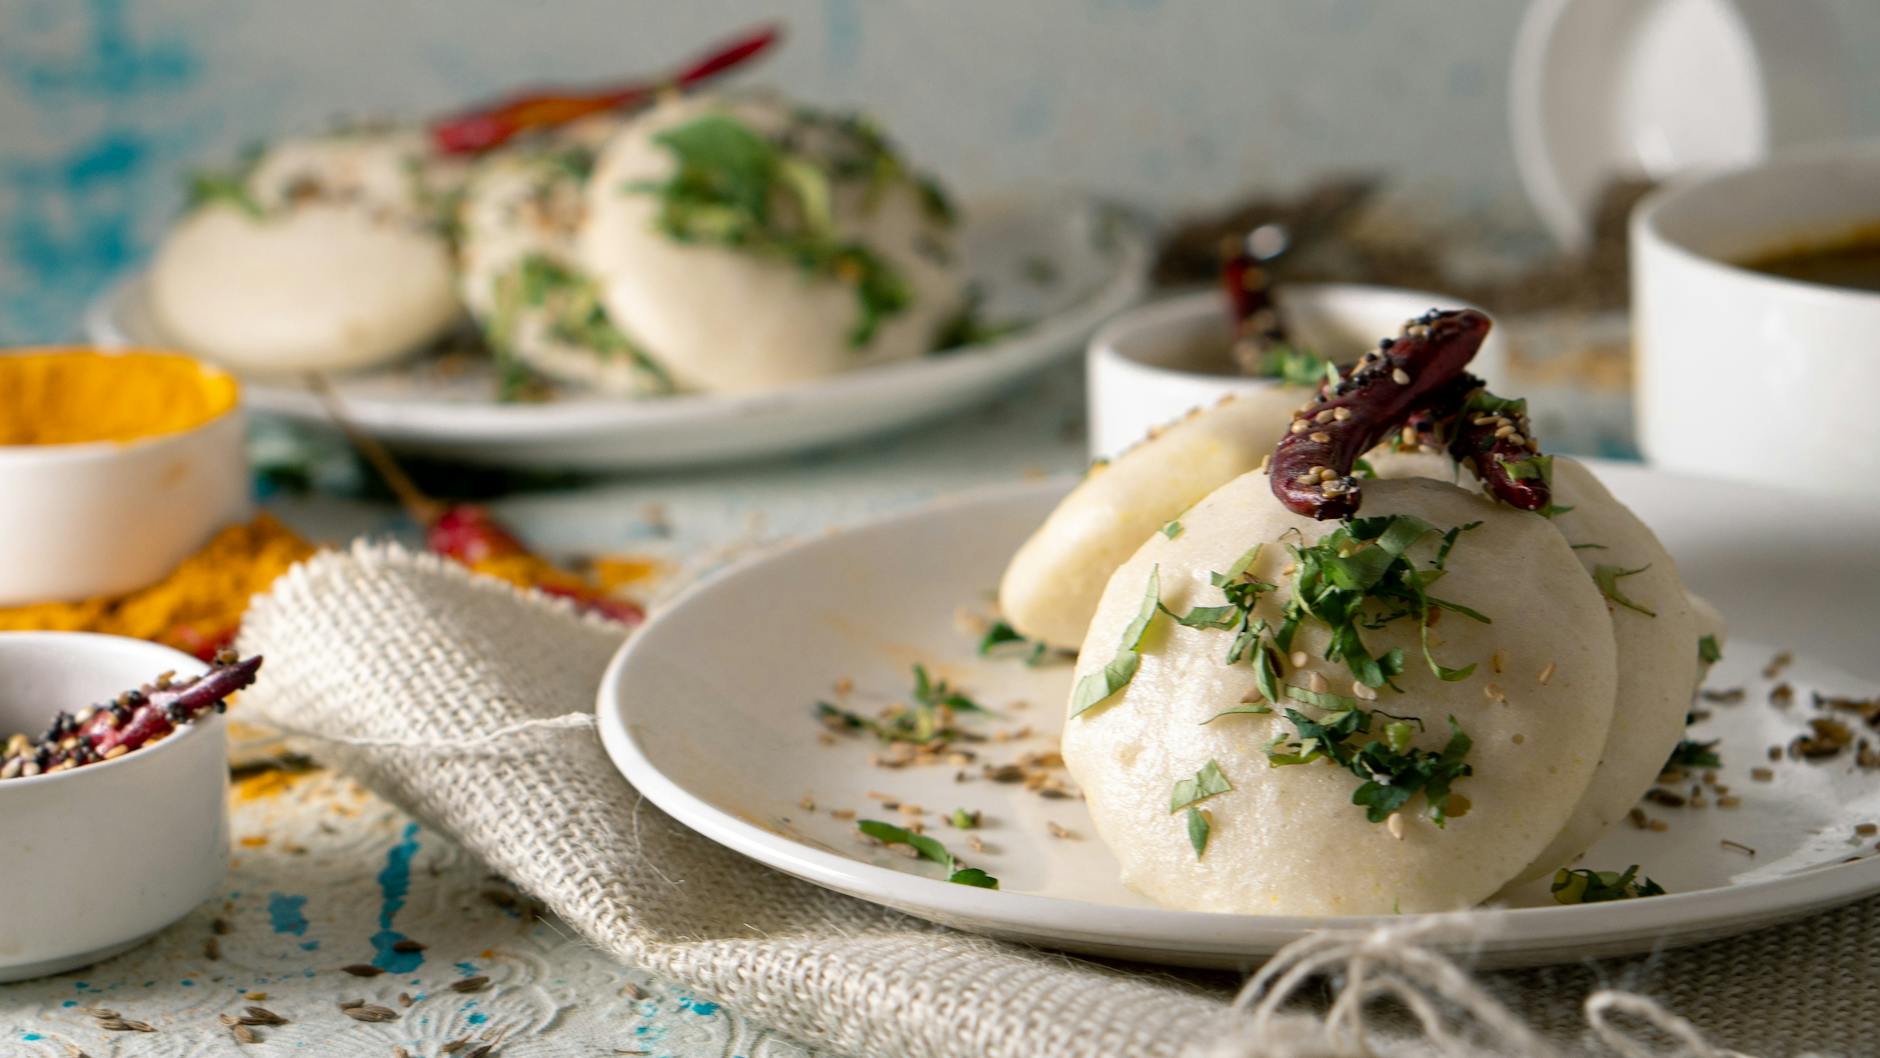 delicious dumplings with with herbs and veggies